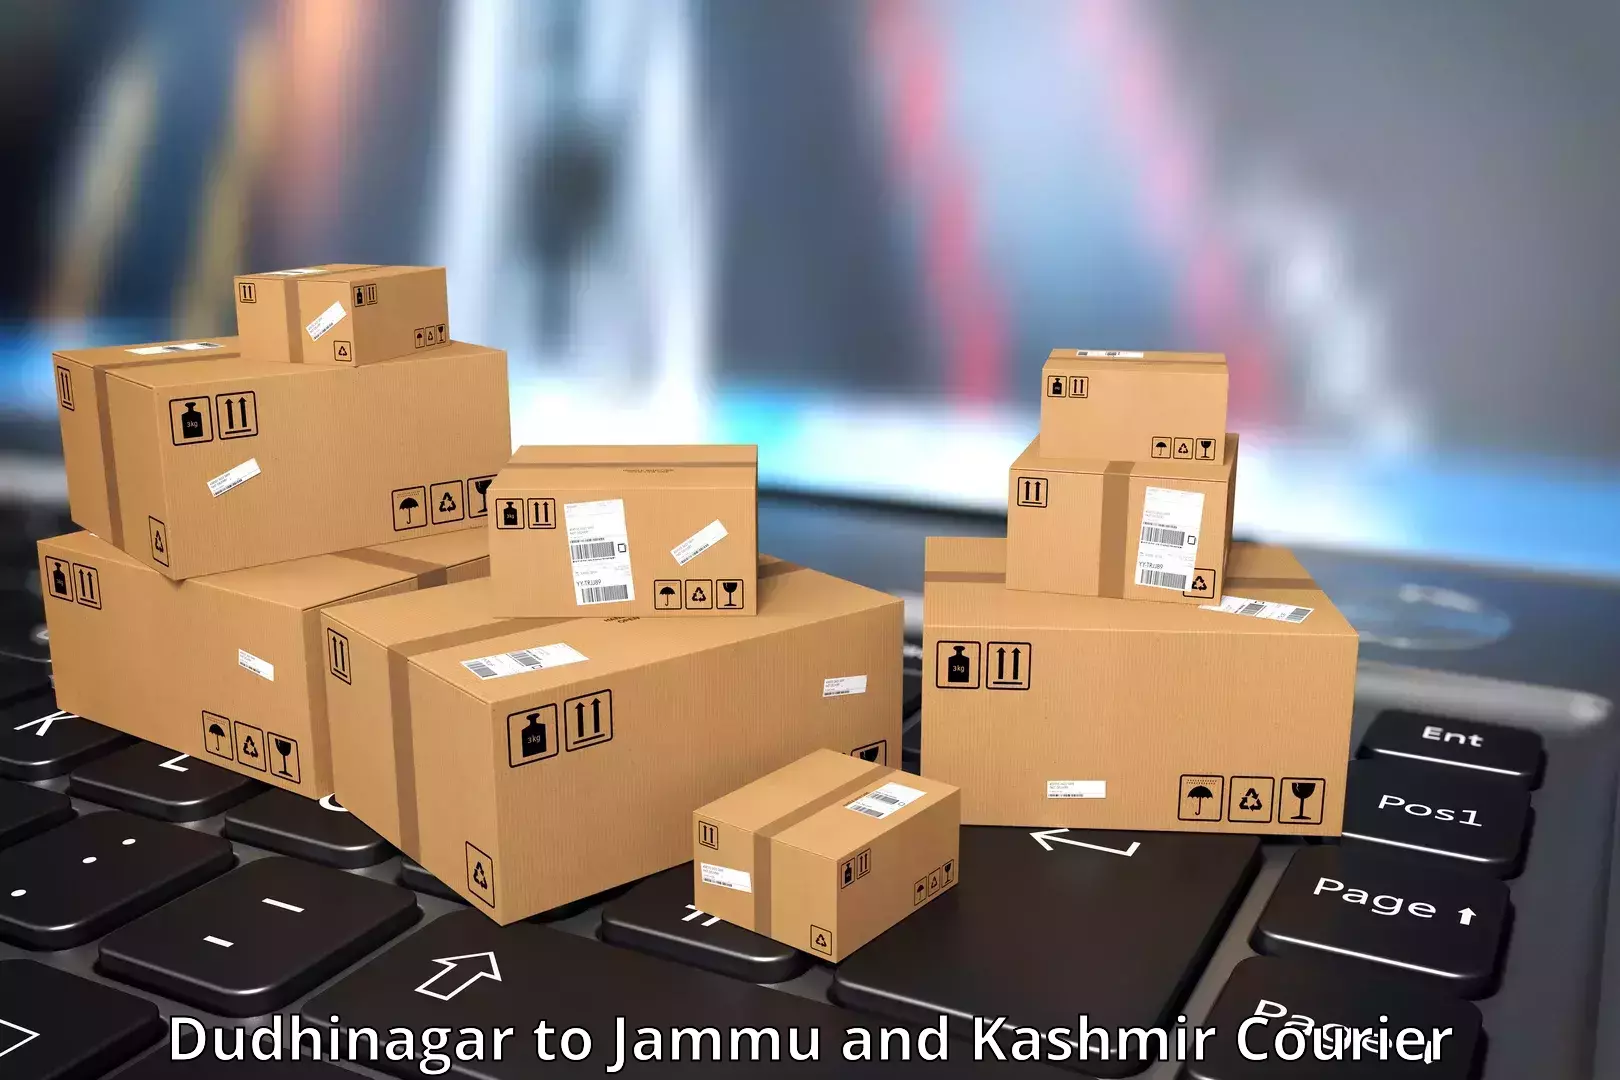 Reliable delivery network Dudhinagar to Jammu and Kashmir